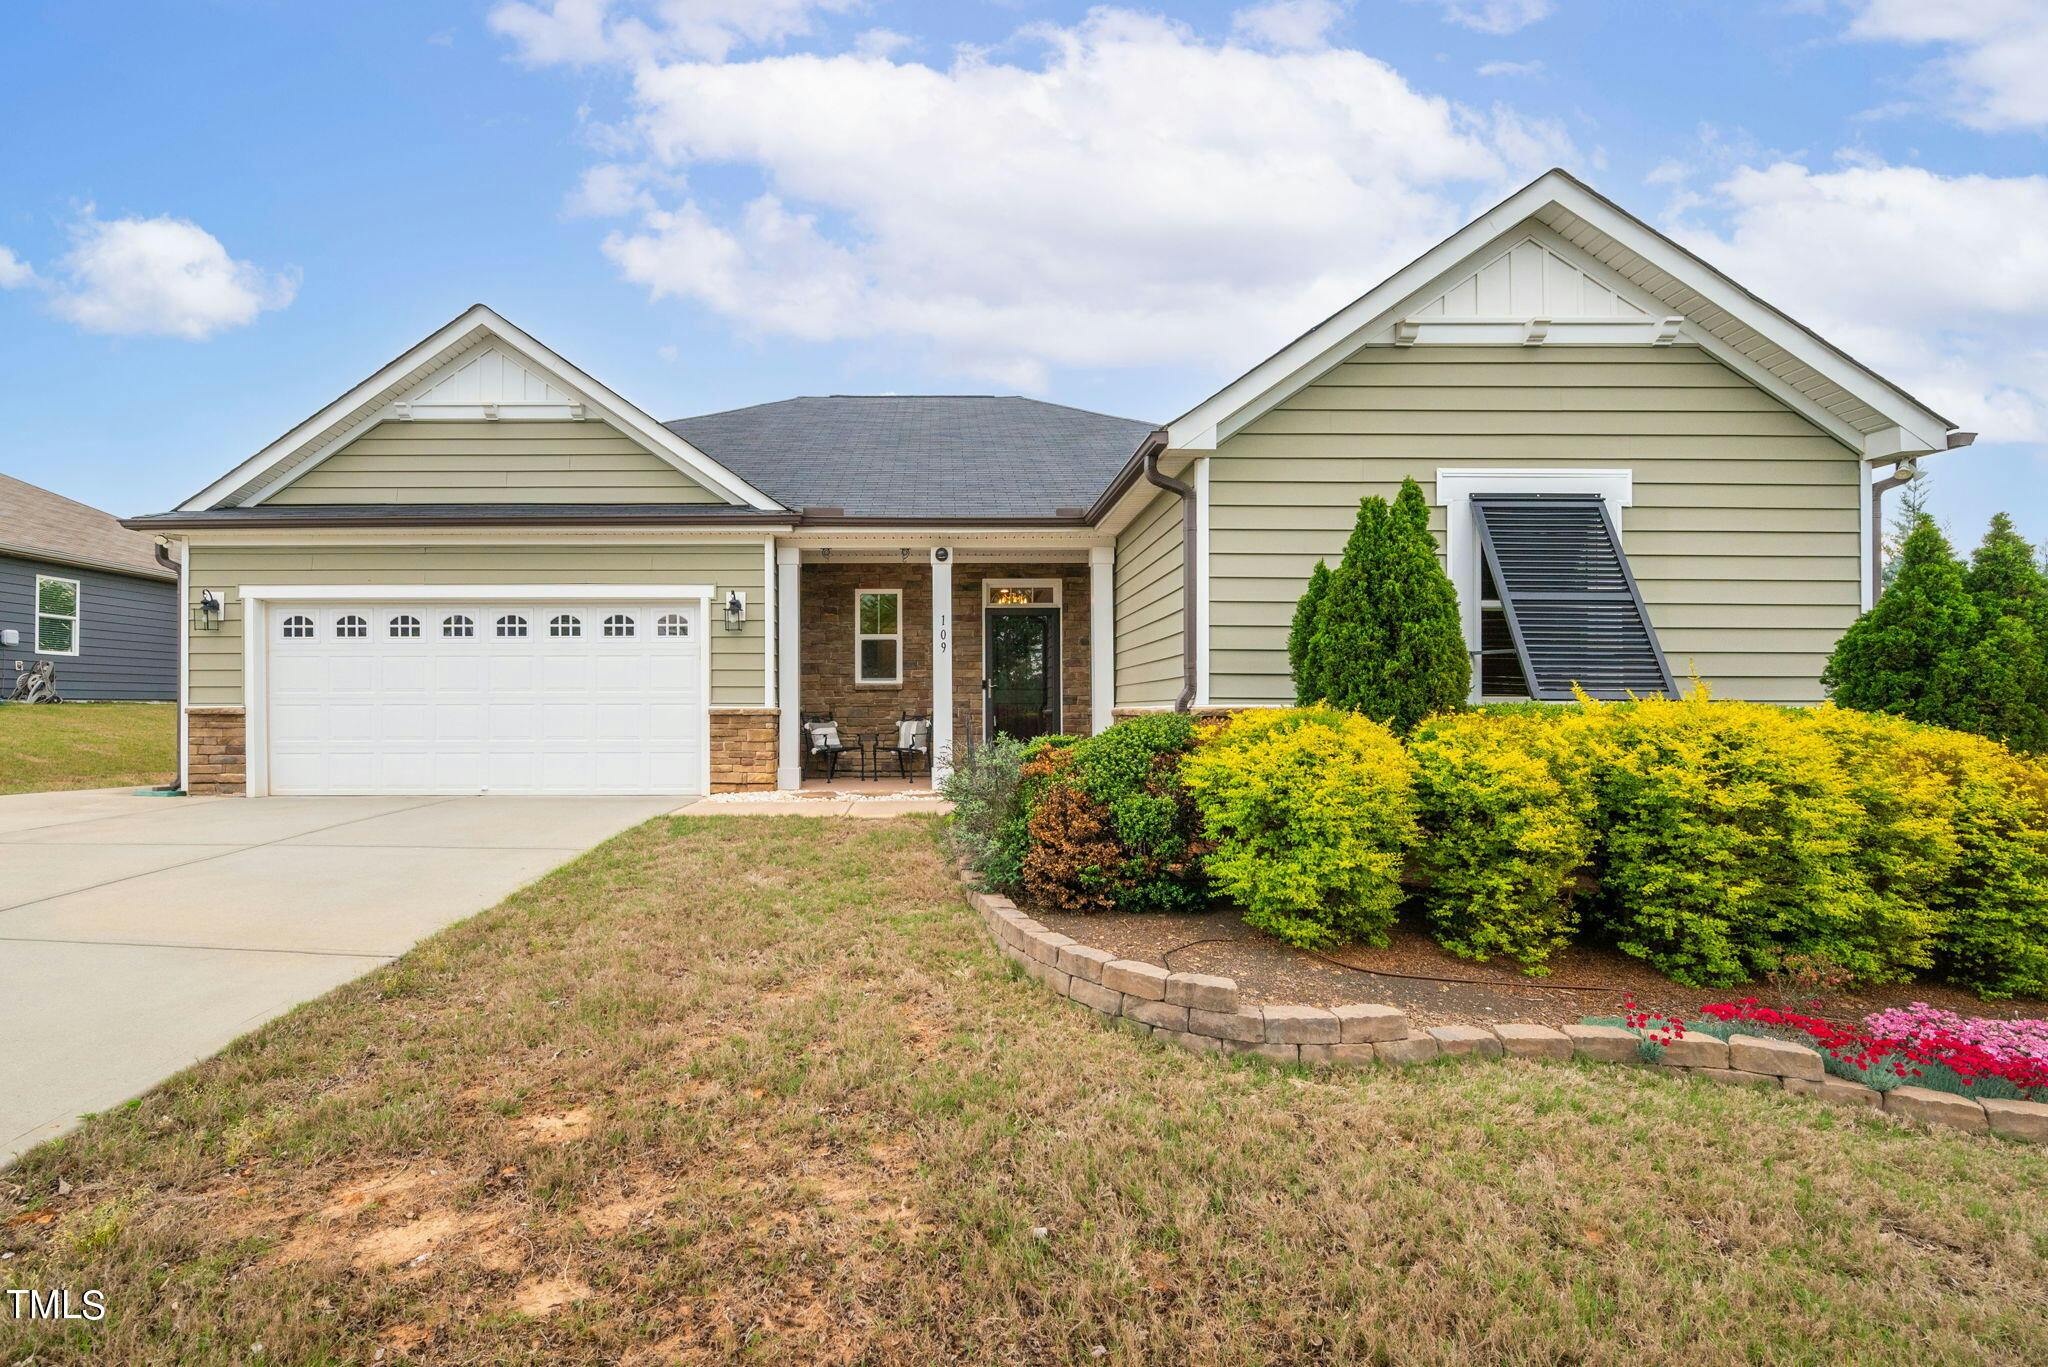 3-web-or-mls-109-congaree-dr